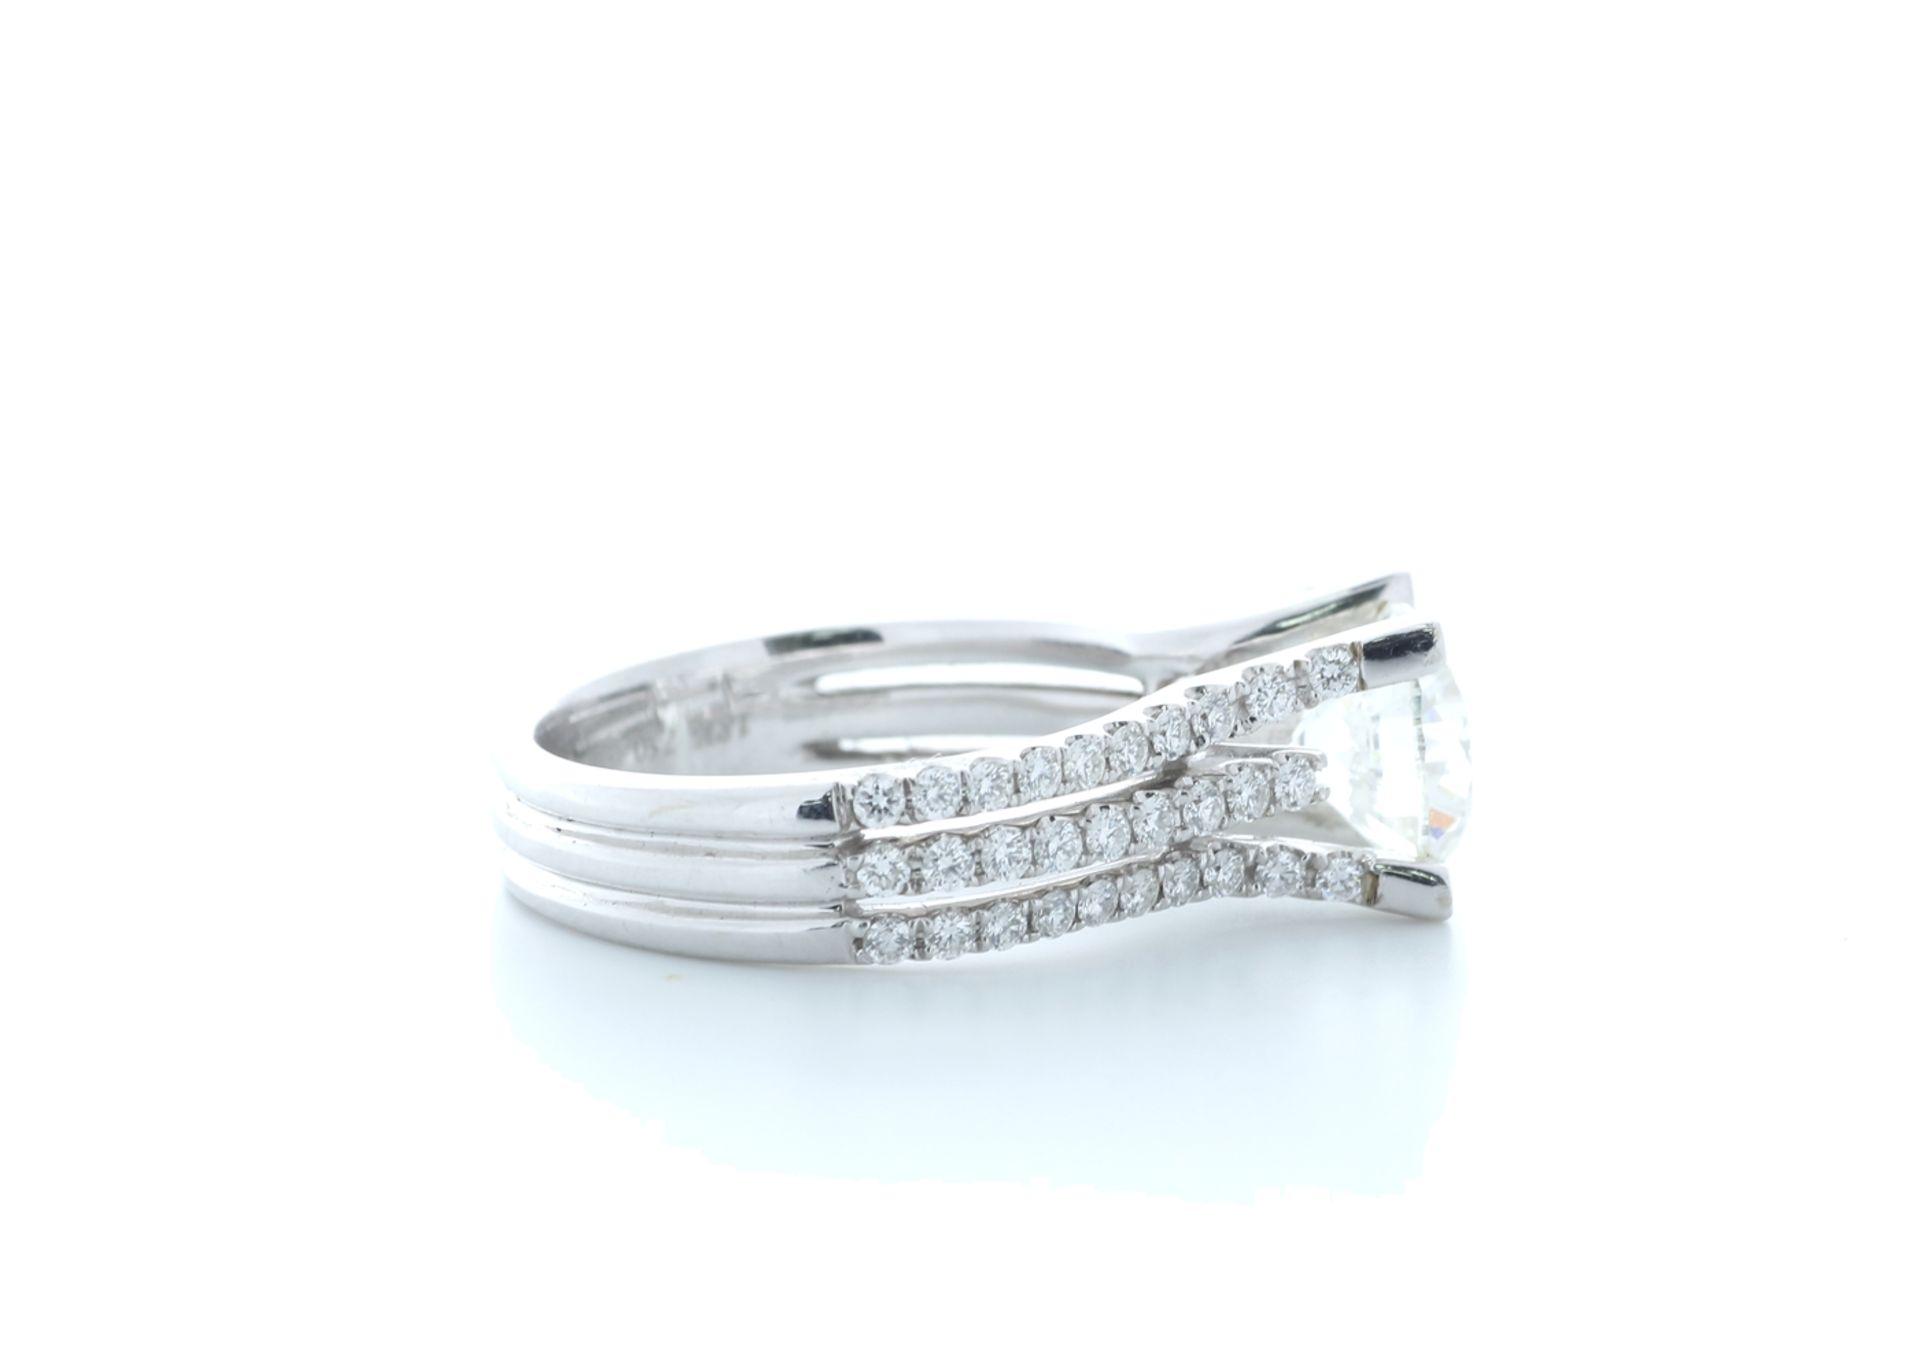 18ct White Gold Three Row Diamond Ring 3.10 (2.1) Carats - Valued by IDI £78,950.00 - 18ct White - Image 4 of 5